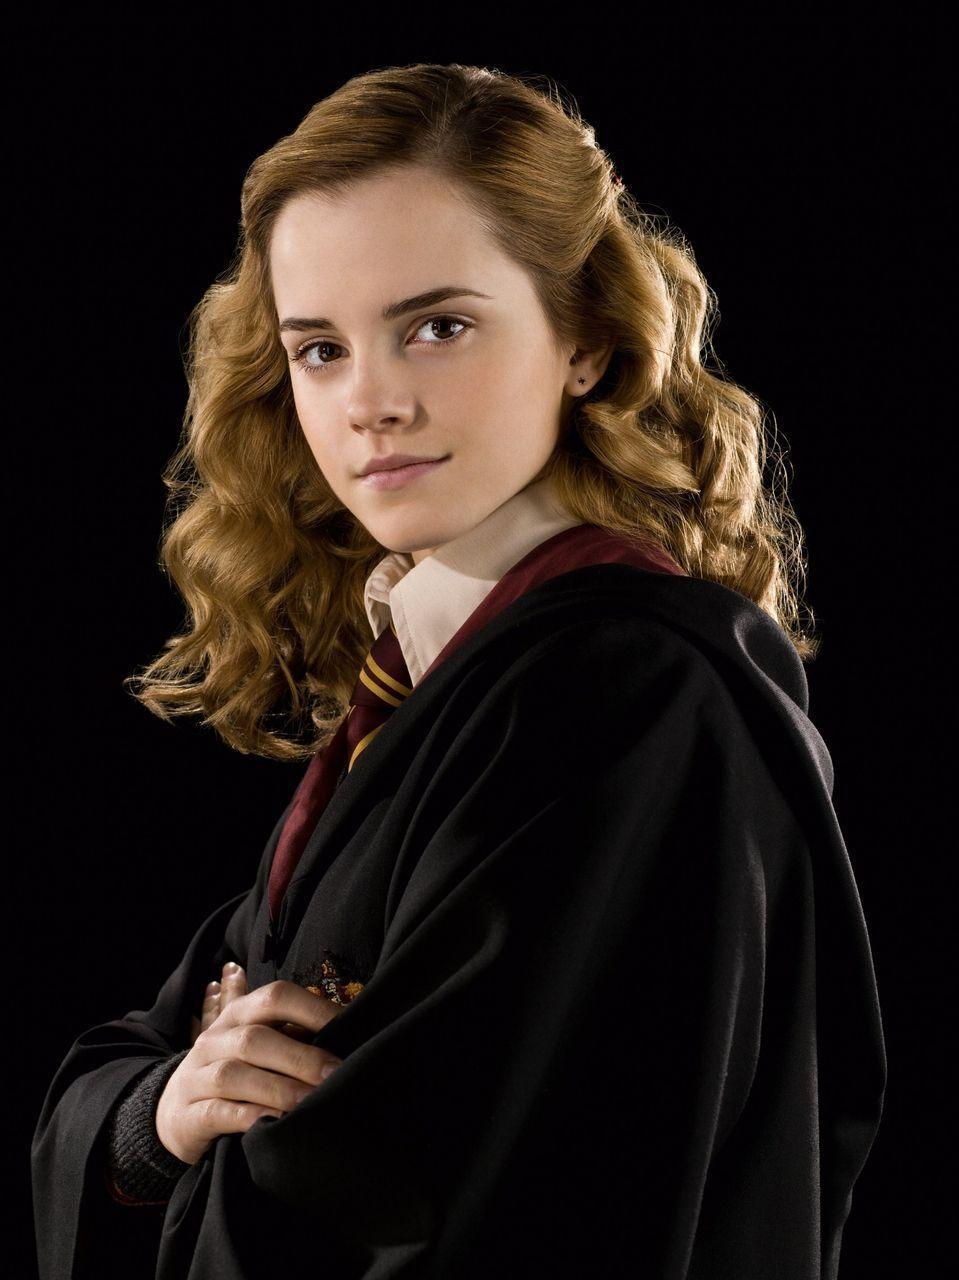 Photo of Hermione Granger for fans of Harry Potter. Piccoli